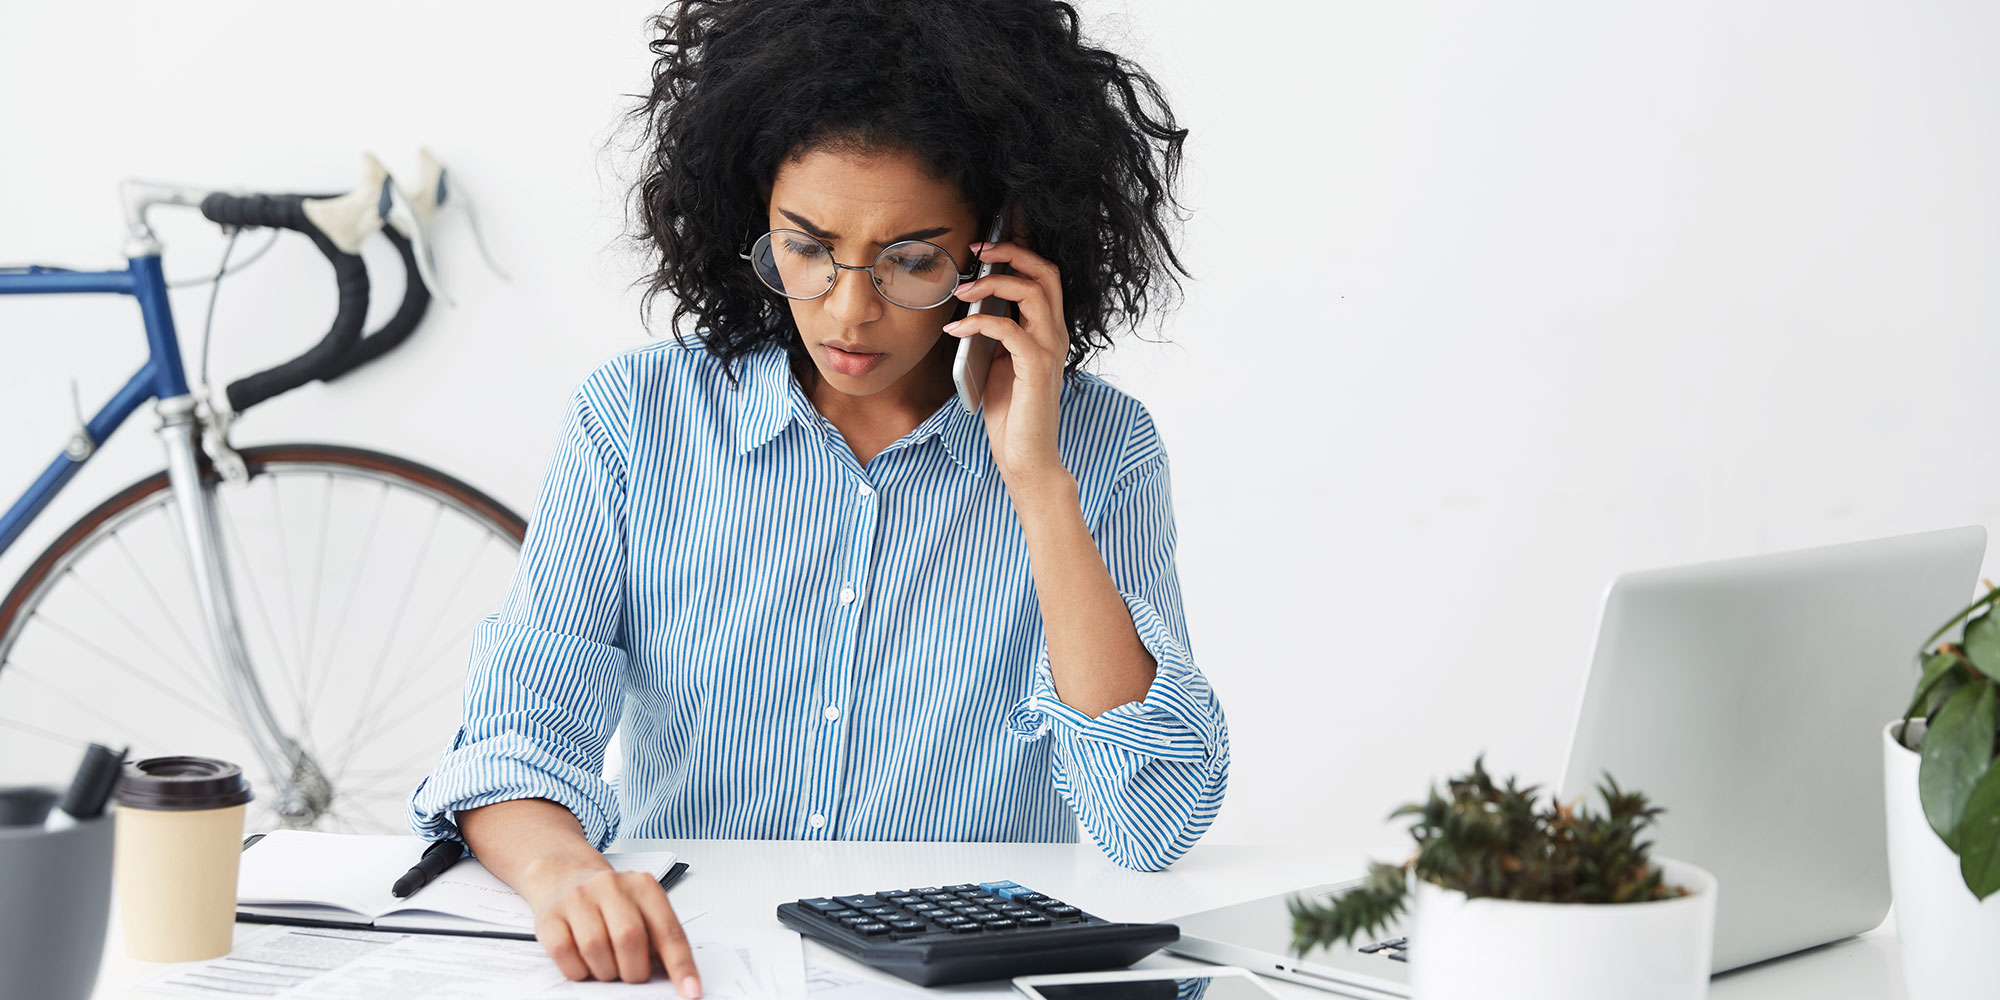 When a Debt Collector Calls:  What are Your Rights?